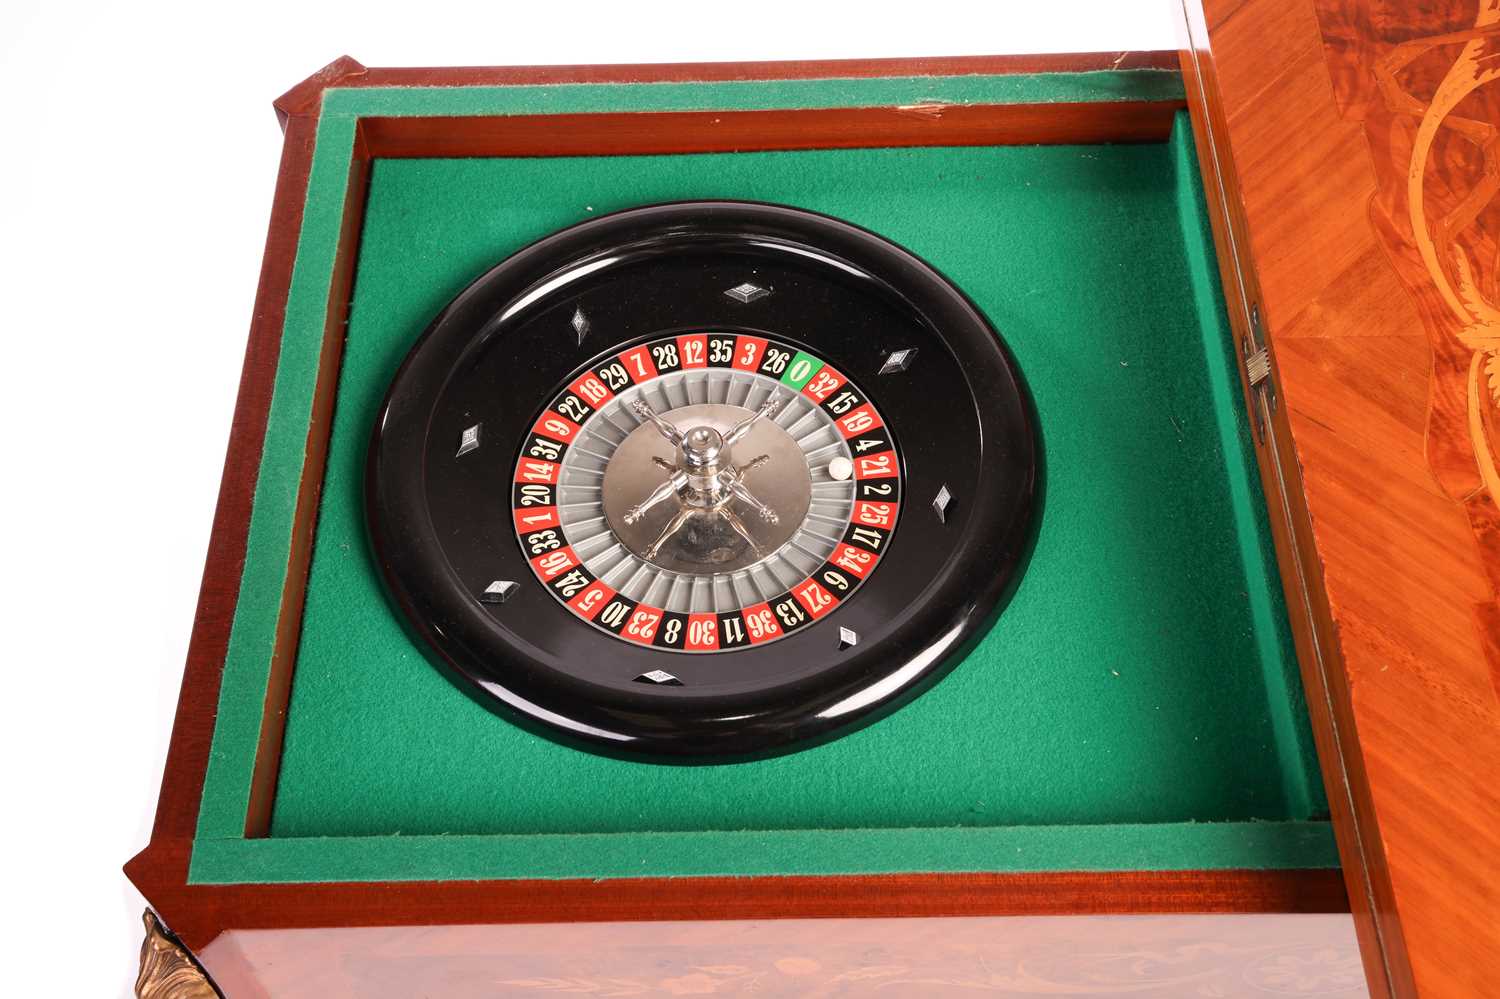 An Italian Dal Negro walnut and marquetry gaming/roulette table, and gaming compendium the fold over - Image 7 of 8